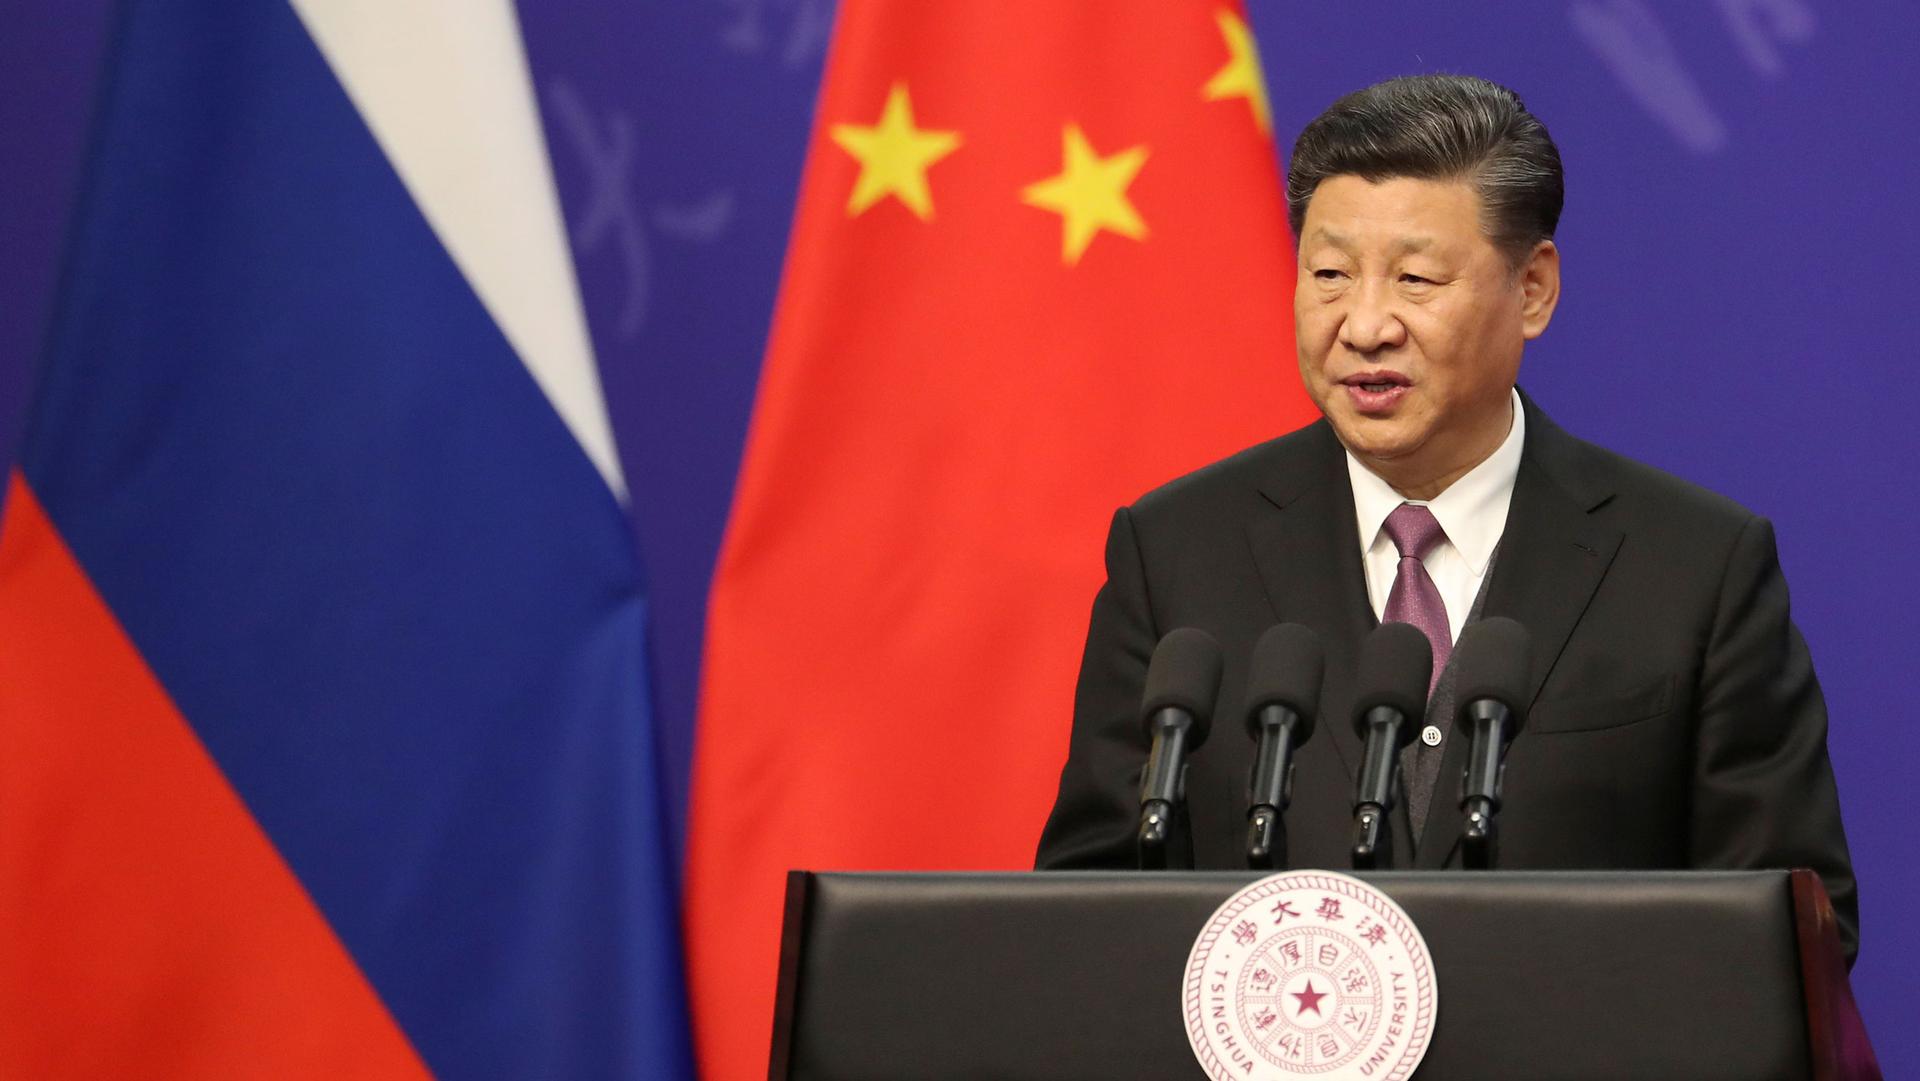 Chinese President Xi Jinping is shown standing at a podium with four microphones.